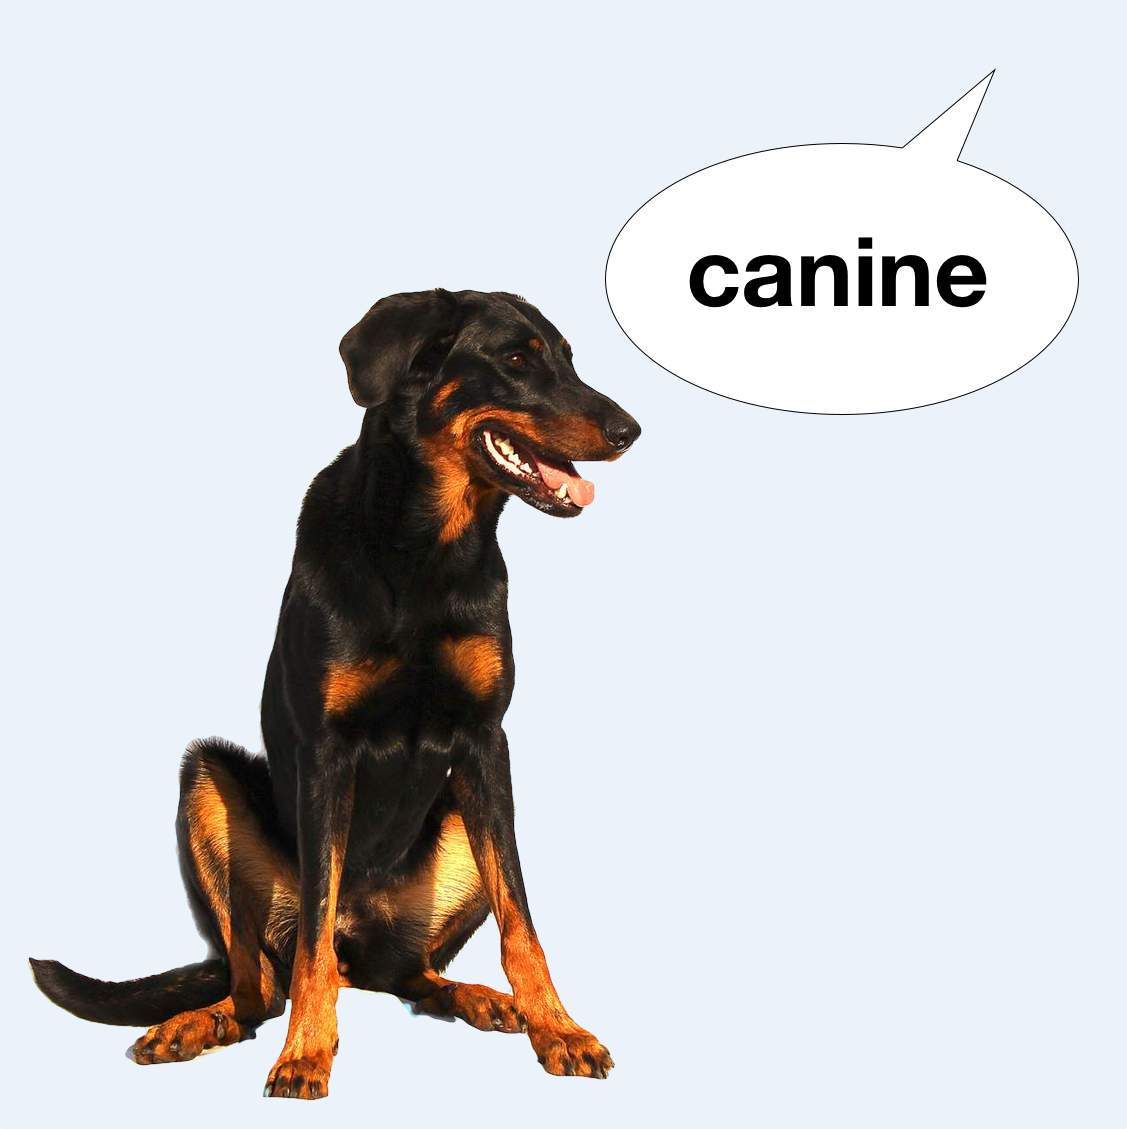 A dog with a speech bubble.